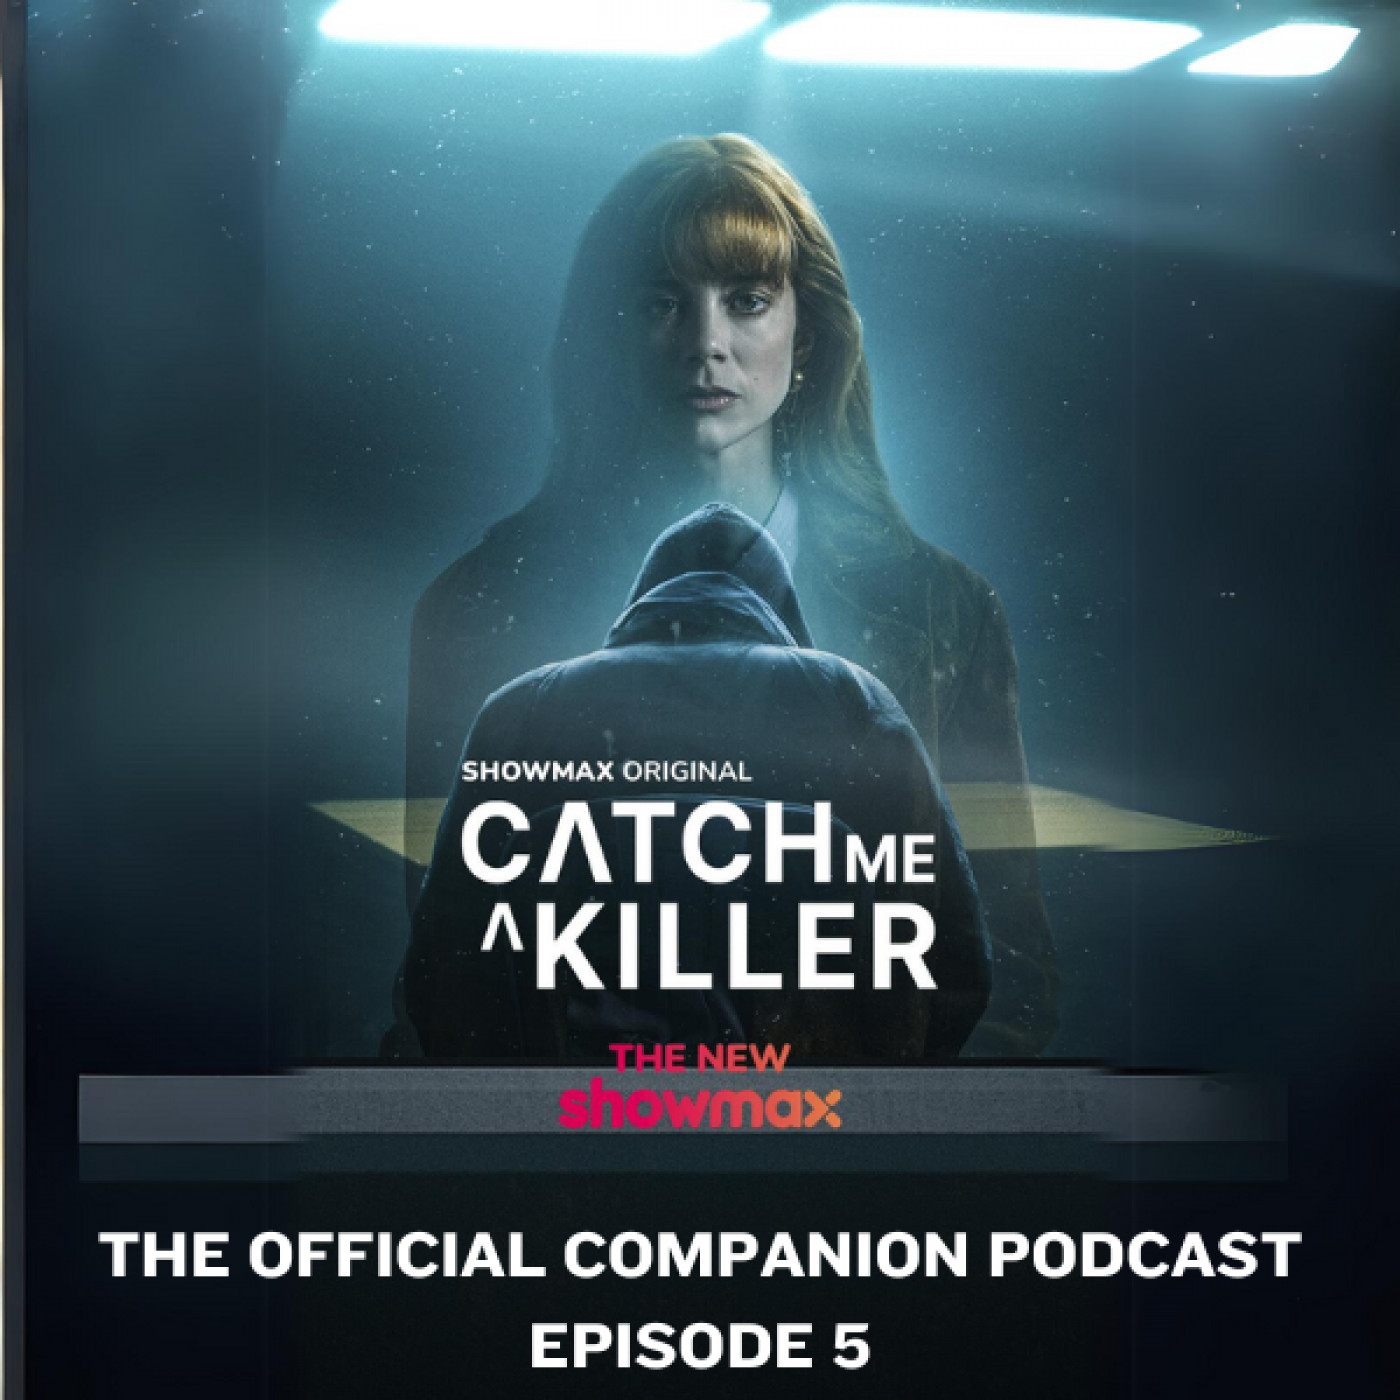 Catch Me A Killer: Official Companion Podcast Brought to you by Showmax (Episode 5)